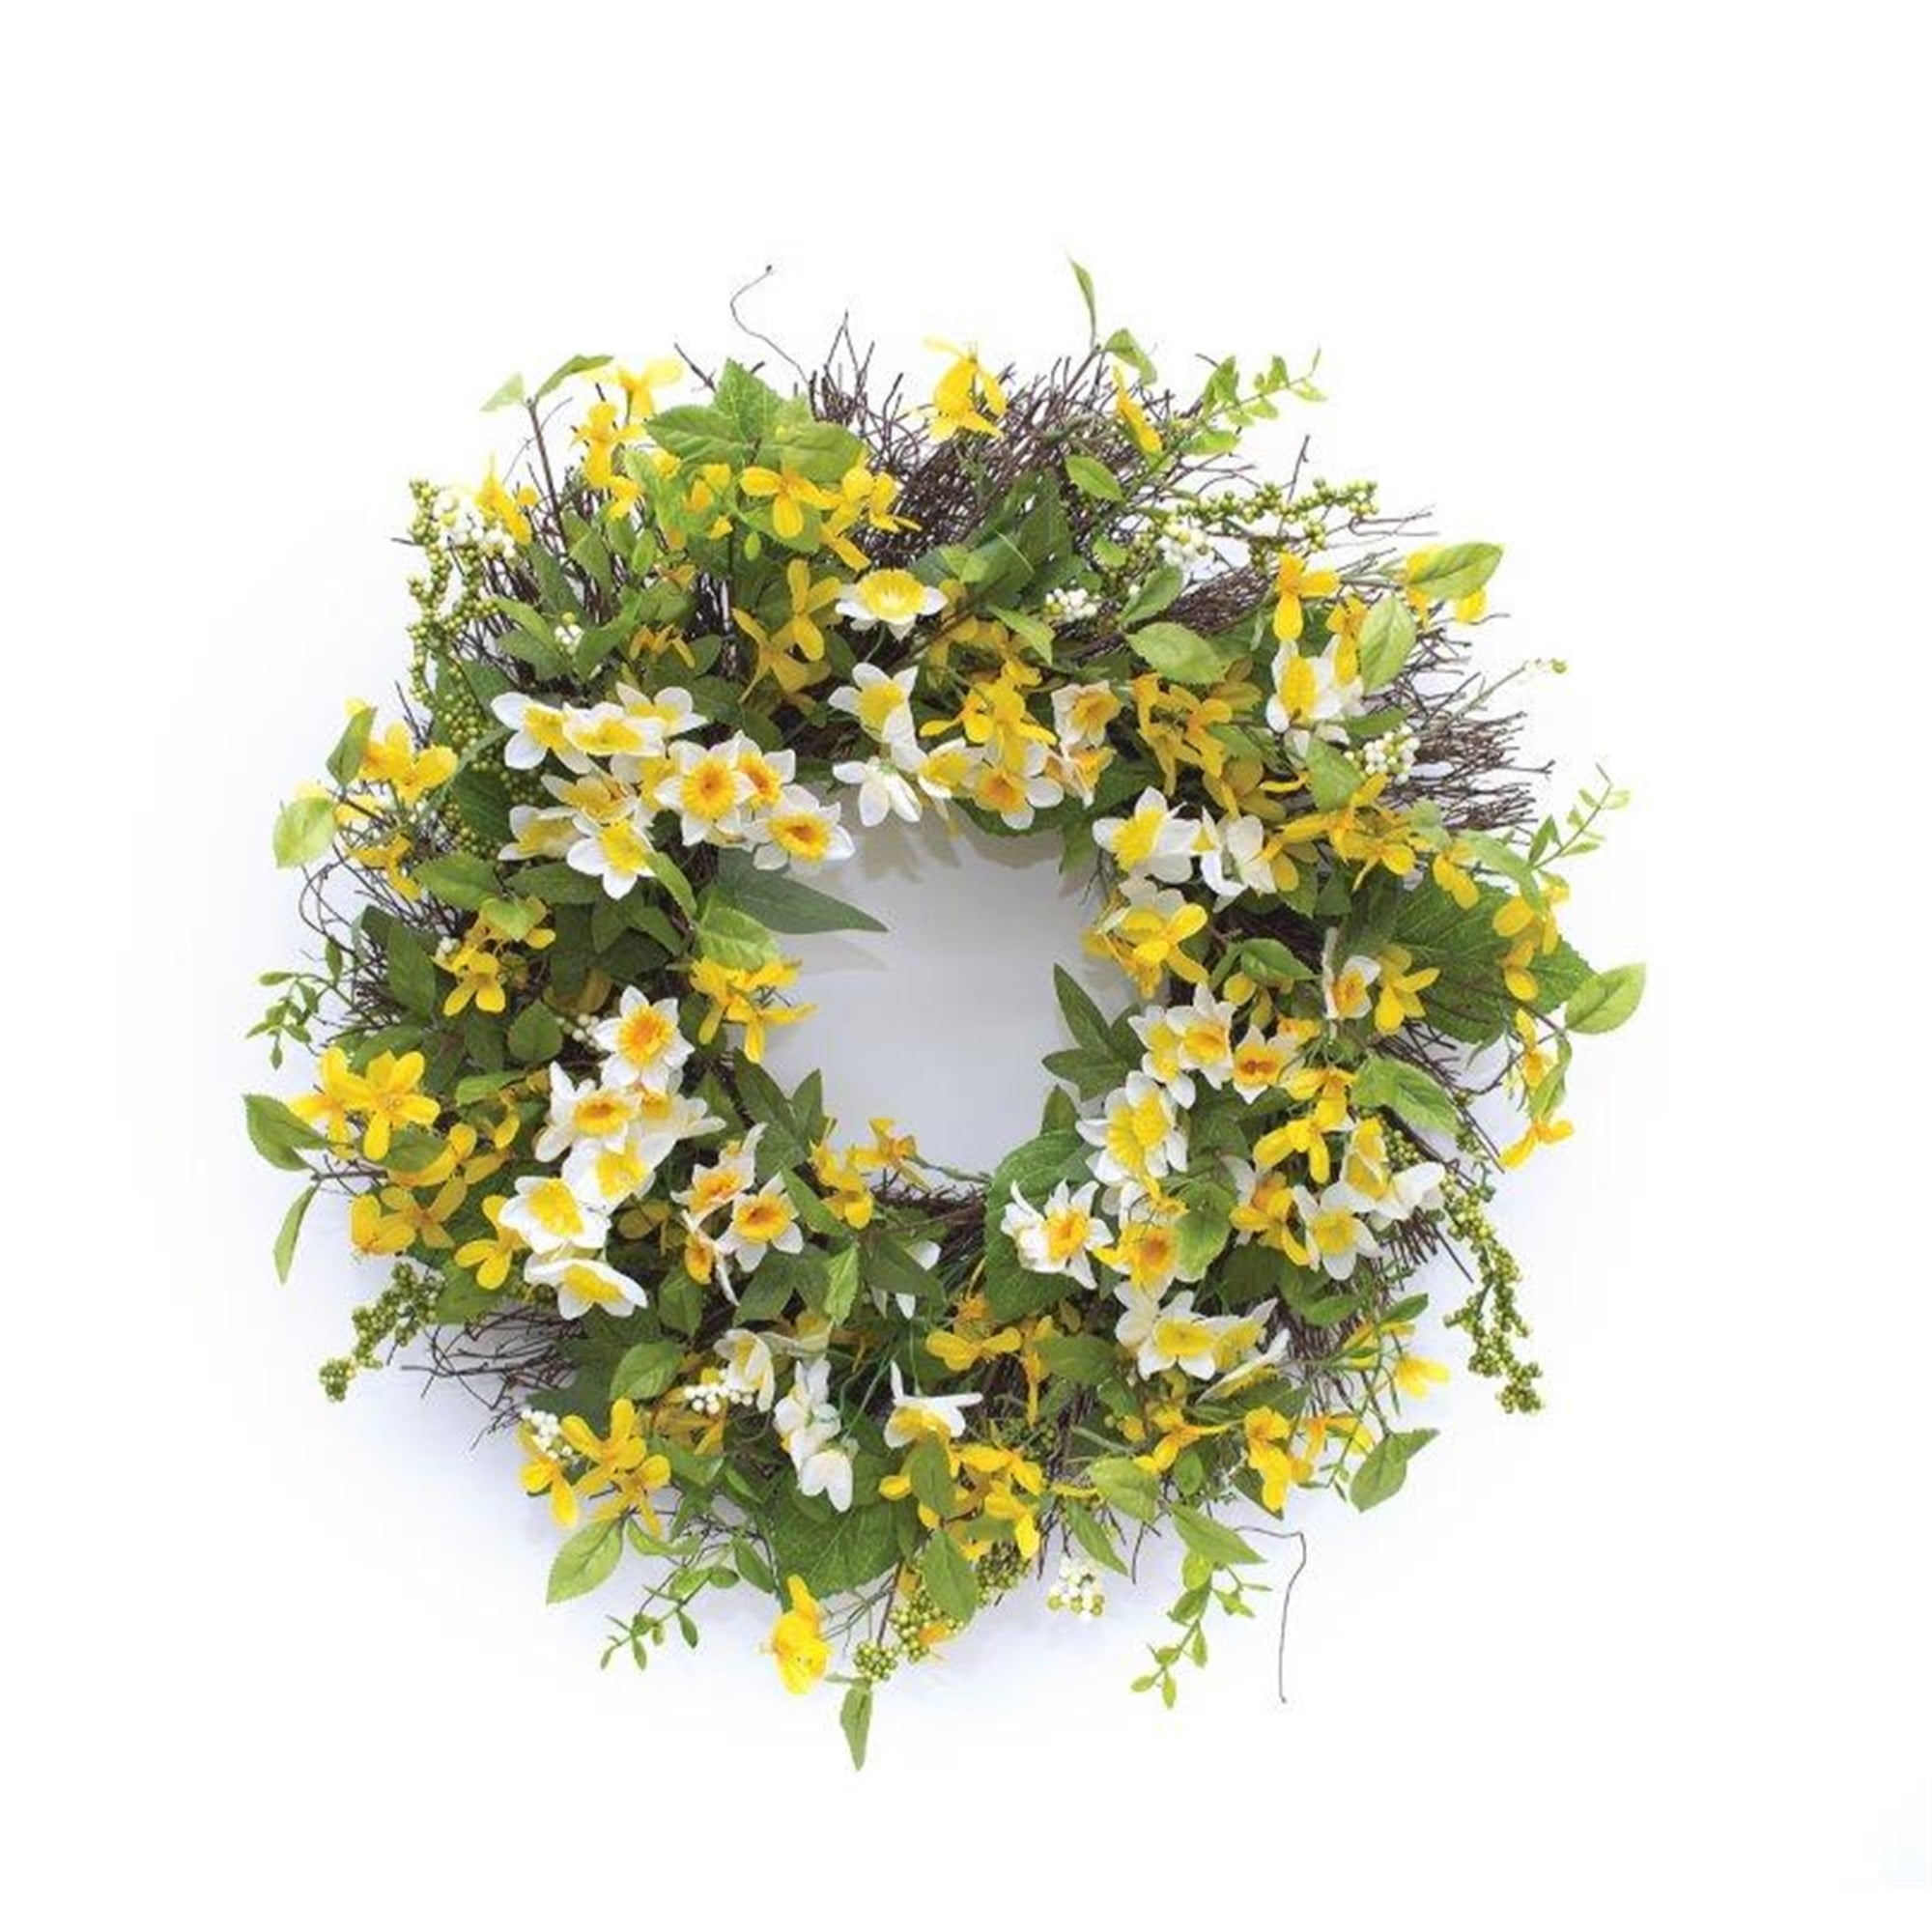 Narcissus and Forsythia Wreath 26"D Polyester